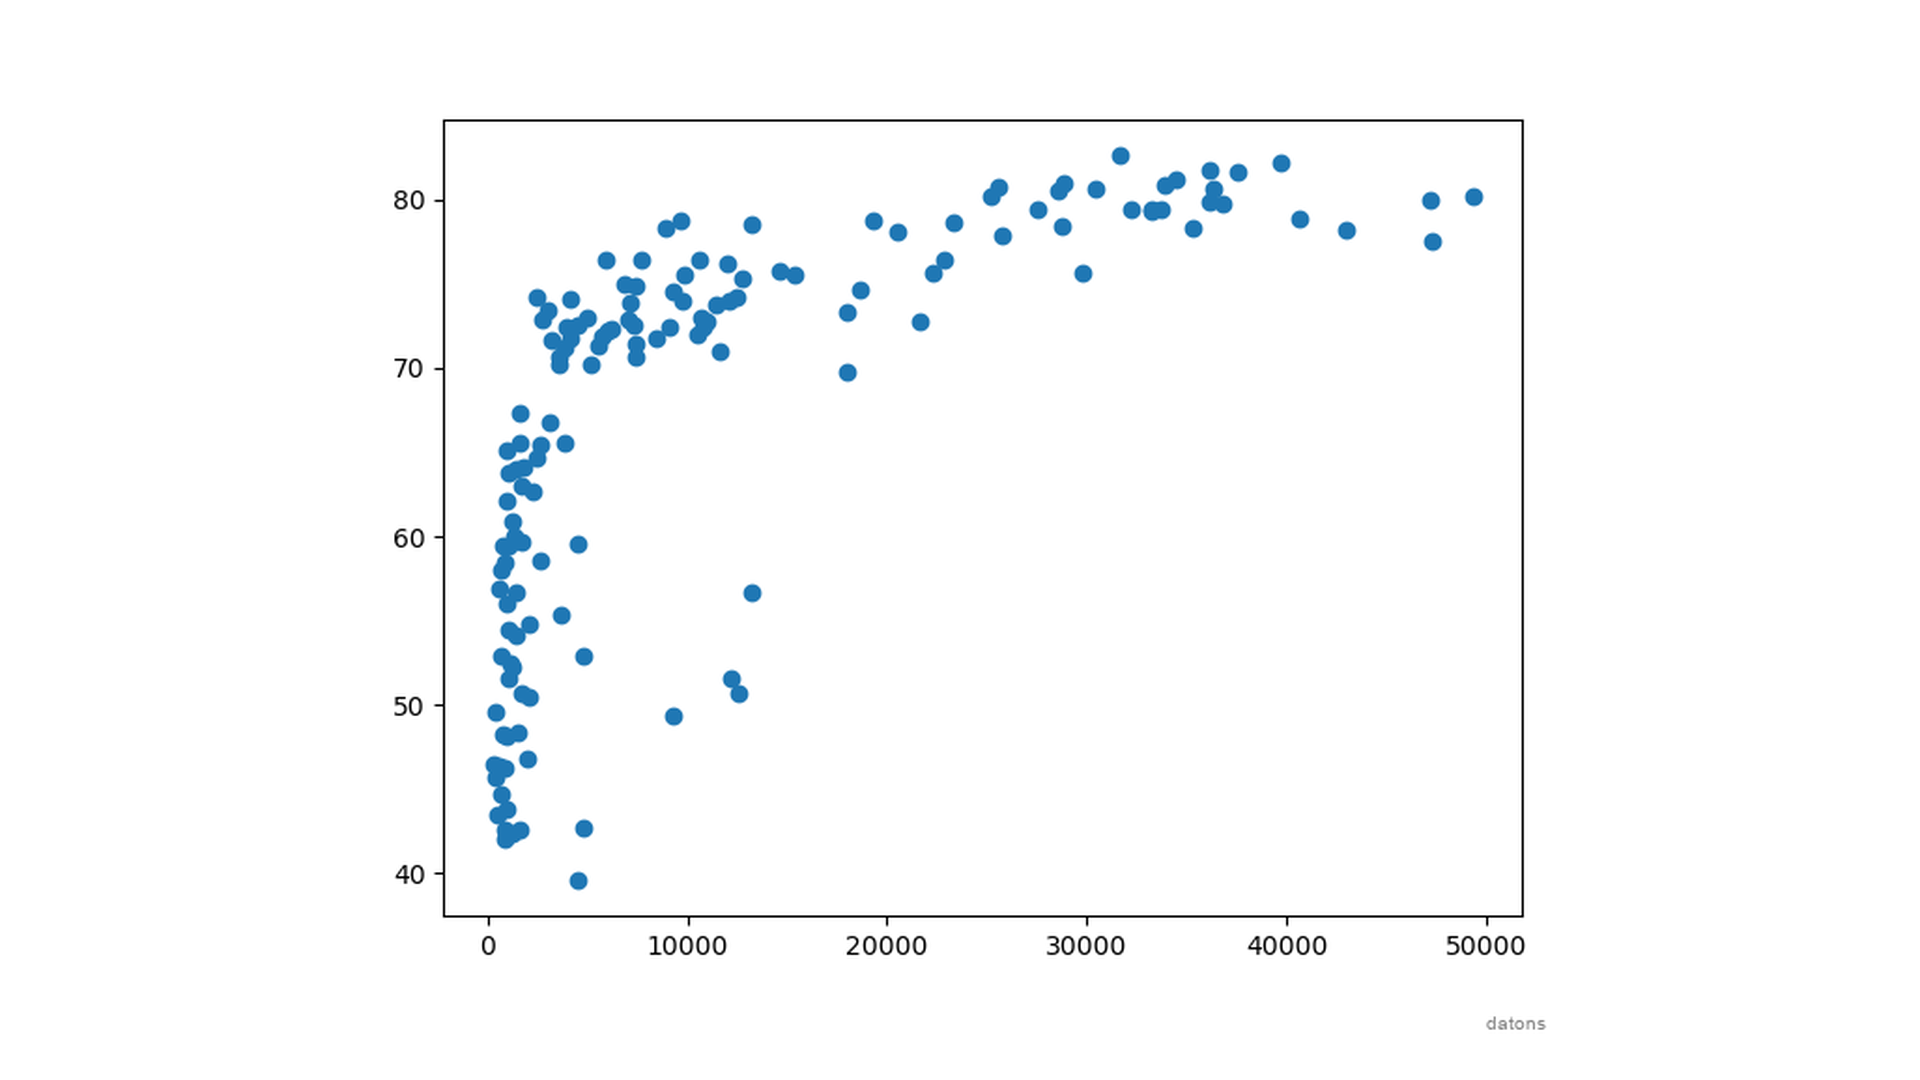 Simple scatter plot created with Matplotlib showing GDP per capita vs life expectancy